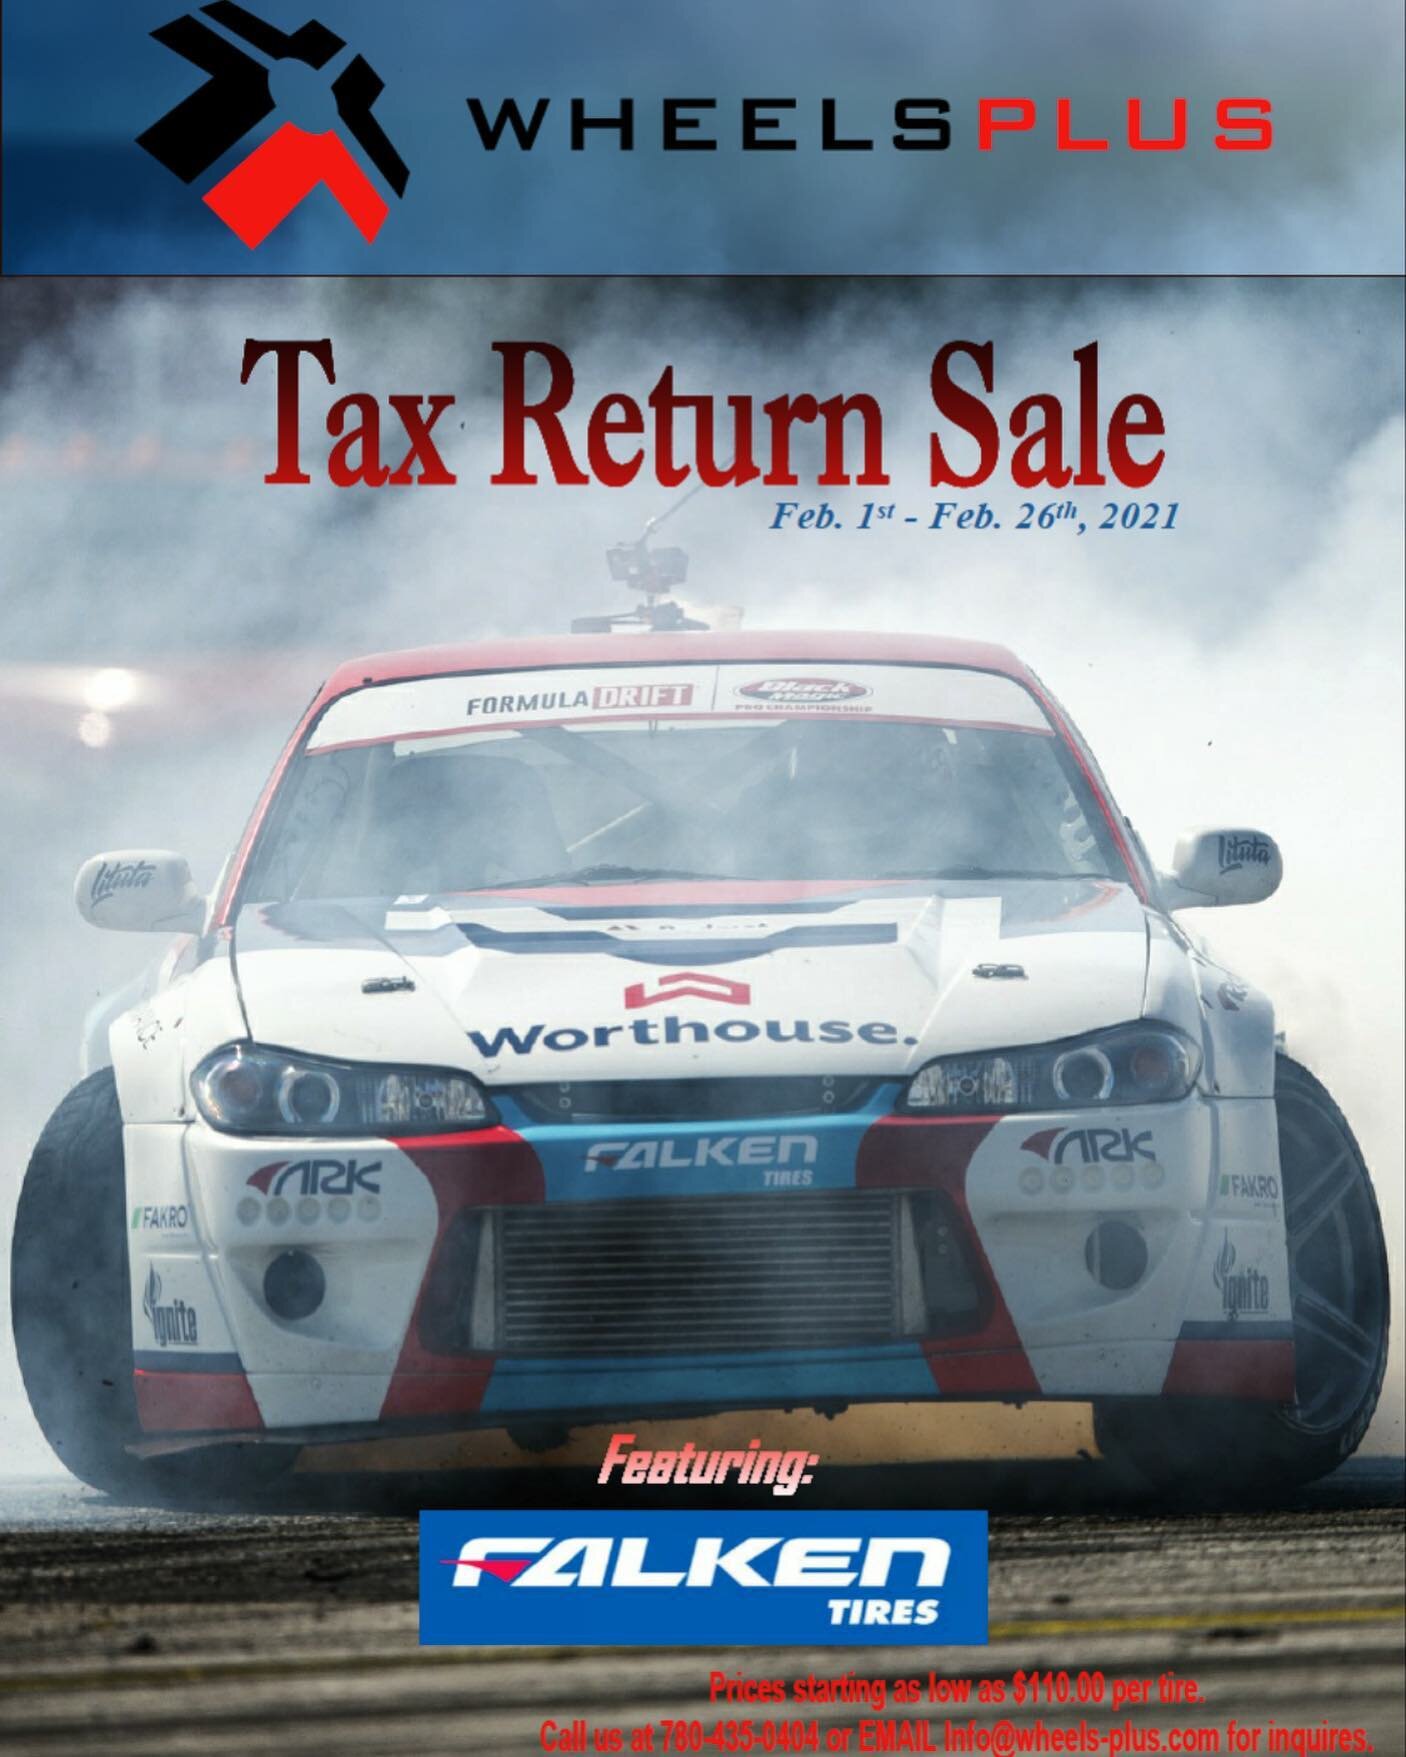 Happy February 1st! That means it&rsquo;s time for our Falken Tire group buy. Sale ends February 26th so get your order in as soon as possible! @falkentire #wheelsplus #tiresale #groupbuy #edmonton #yeg #780 #alberta #falken #taxreturnmoney